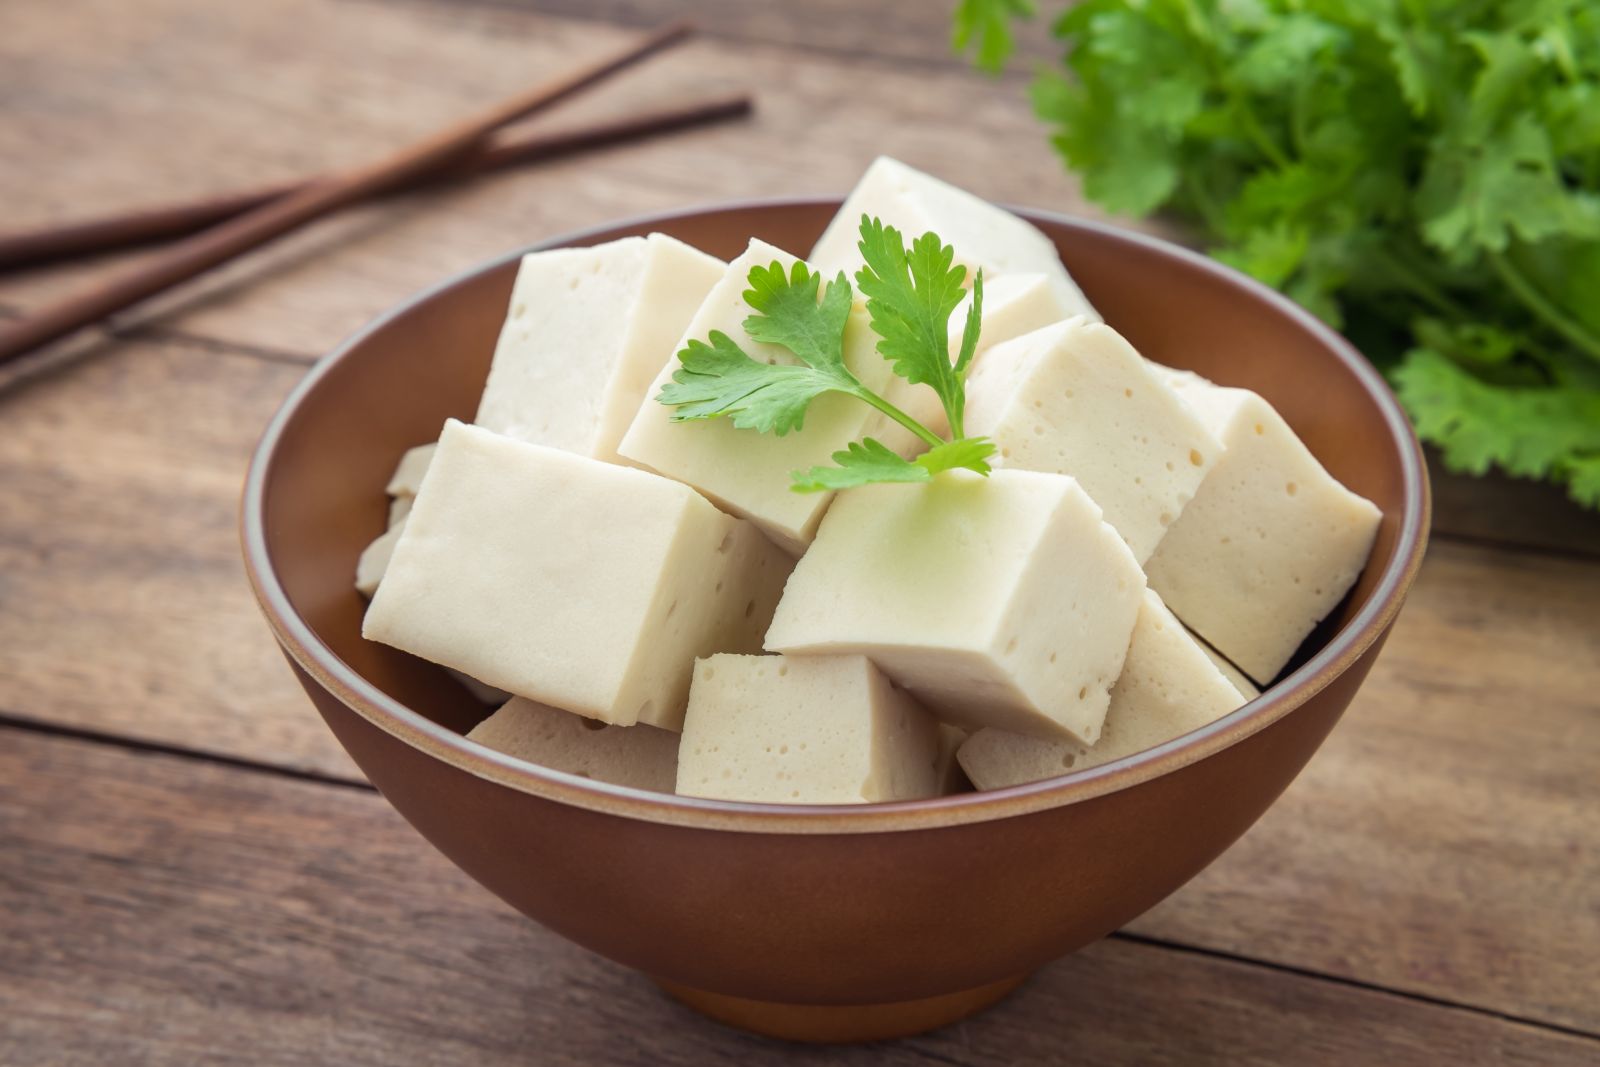 Tofu made from Soybeans via Shutterstock